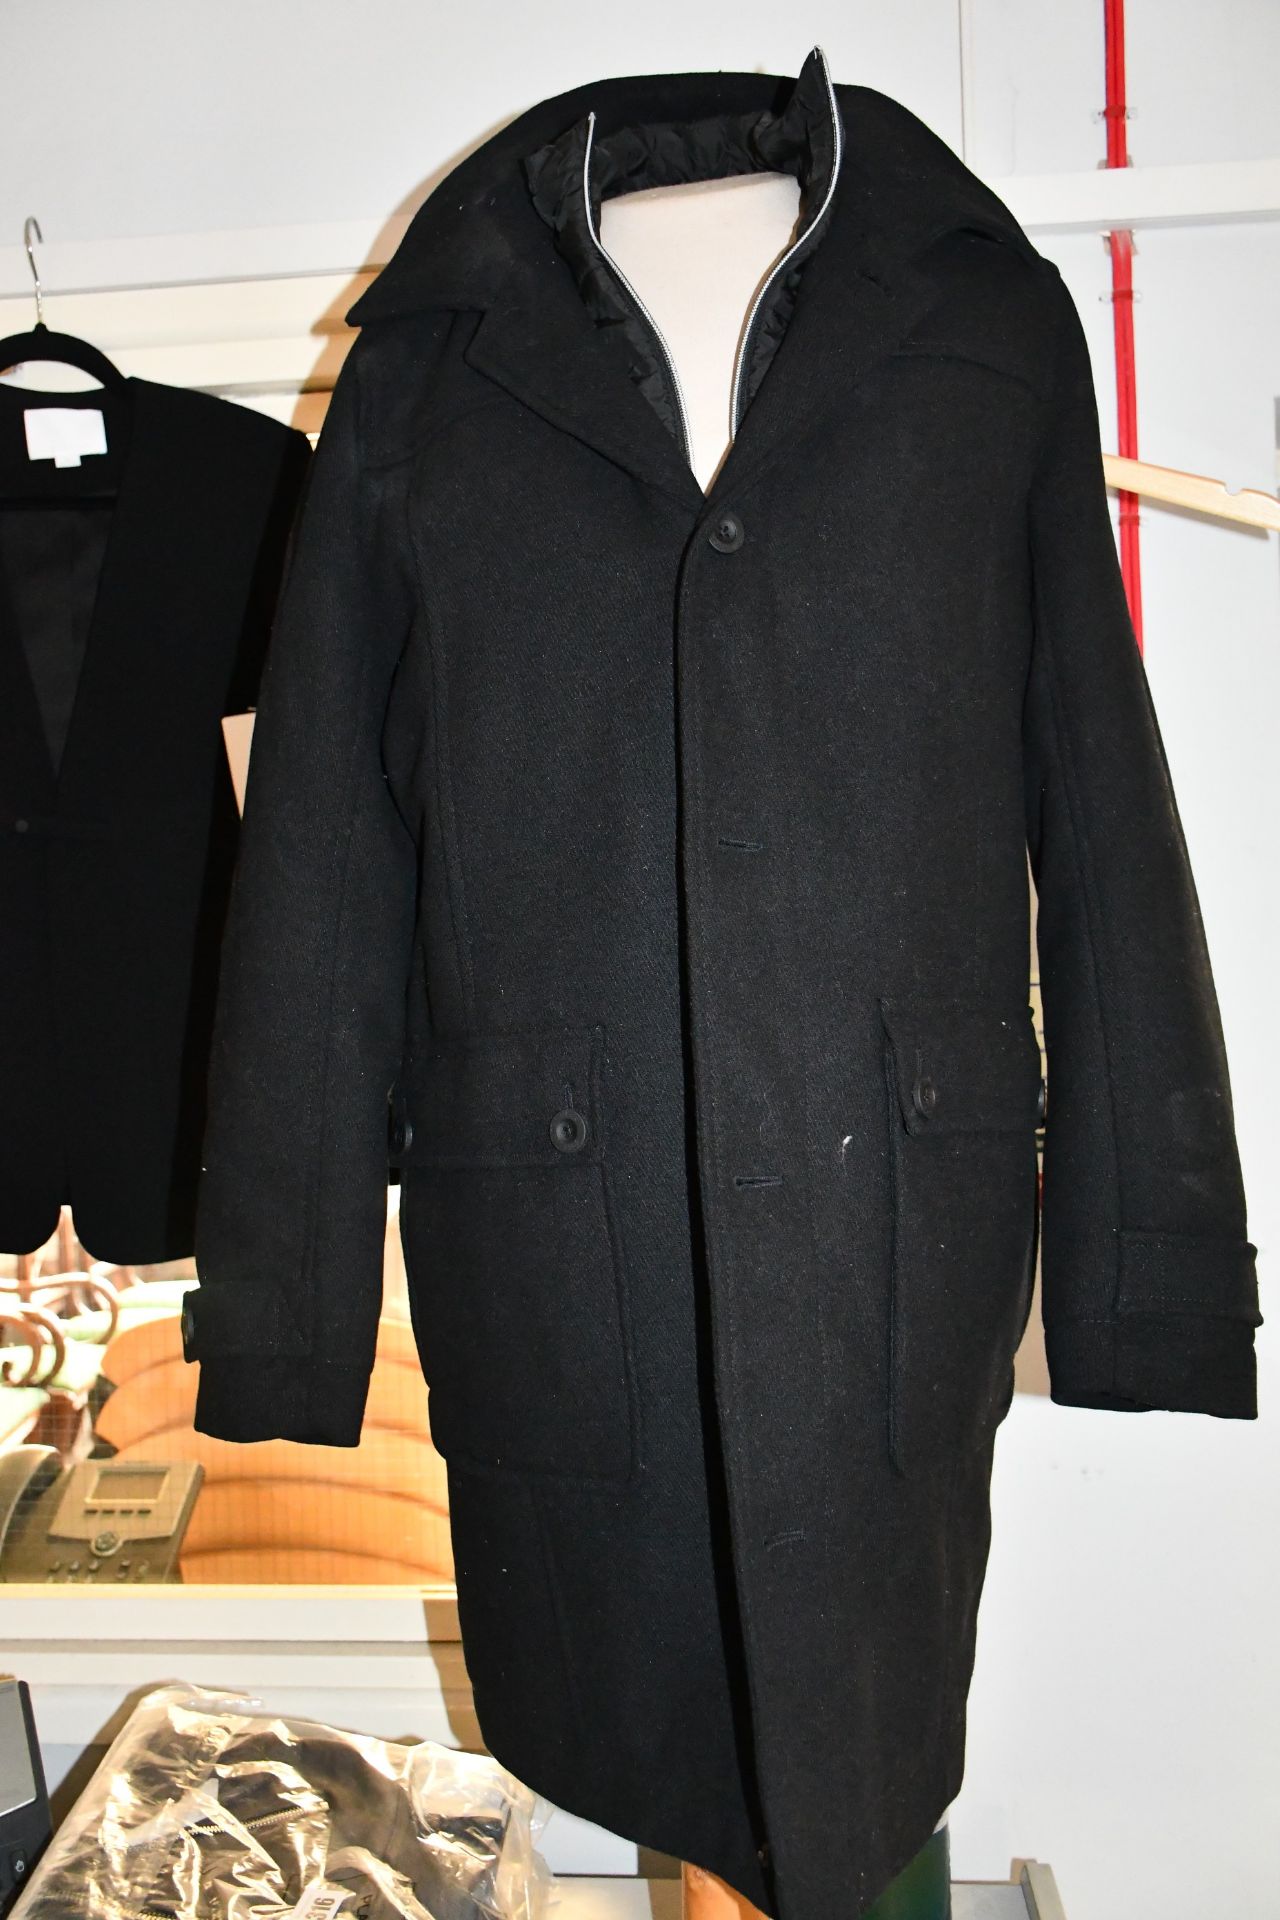 An as new Tom Taylor military style coat (UK L).